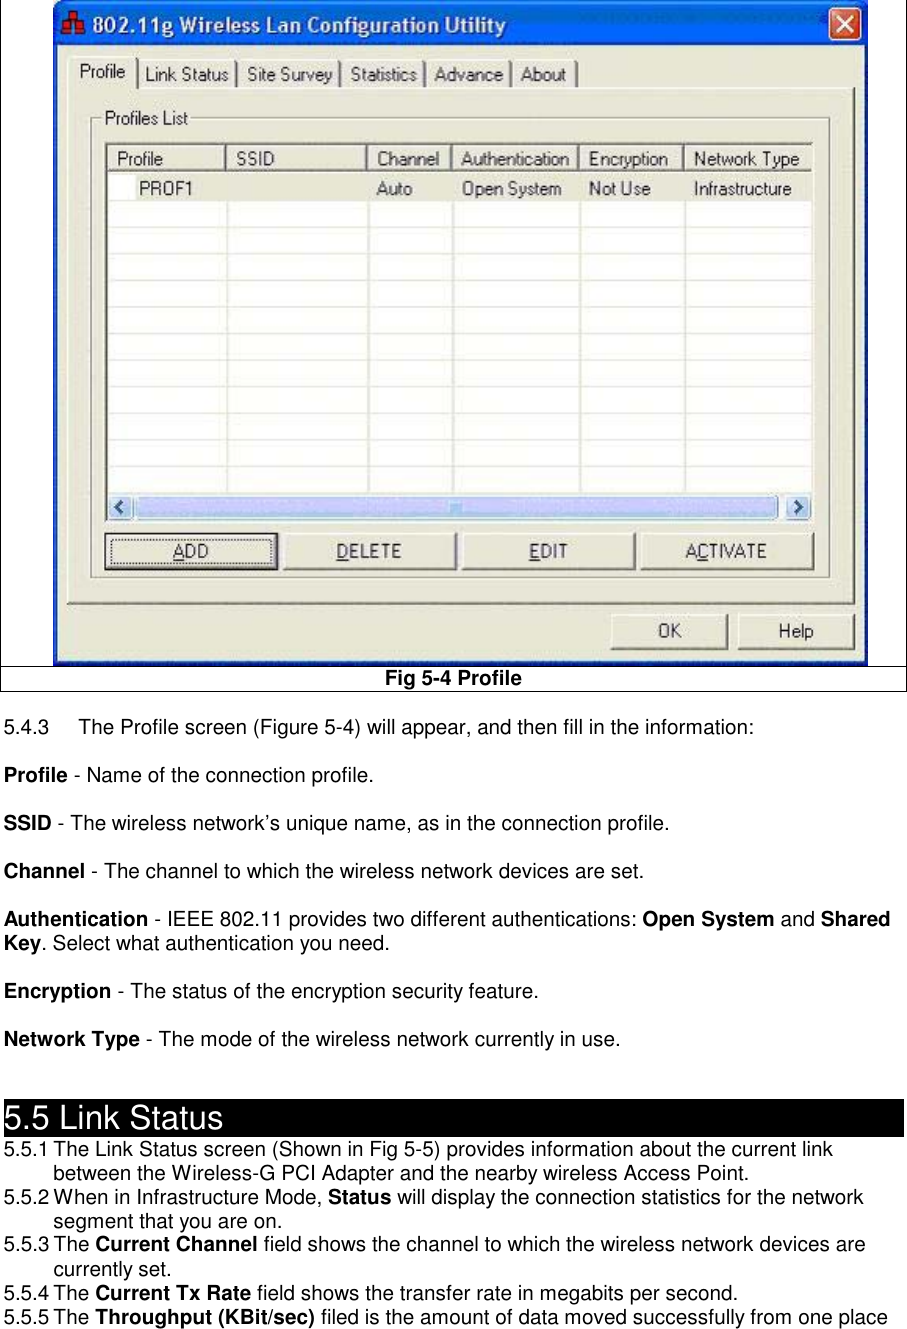  Fig 5-4 Profile    5.4.3  The Profile screen (Figure 5-4) will appear, and then fill in the information:  Profile - Name of the connection profile.  SSID - The wireless network’s unique name, as in the connection profile.  Channel - The channel to which the wireless network devices are set.  Authentication - IEEE 802.11 provides two different authentications: Open System and Shared Key. Select what authentication you need.  Encryption - The status of the encryption security feature.  Network Type - The mode of the wireless network currently in use.   5.5 Link Status                                                 5.5.1 The Link Status screen (Shown in Fig 5-5) provides information about the current link   between the Wireless-G PCI Adapter and the nearby wireless Access Point. 5.5.2 When in Infrastructure Mode, Status will display the connection statistics for the network   segment that you are on. 5.5.3 The Current Channel field shows the channel to which the wireless network devices are currently set. 5.5.4 The Current Tx Rate field shows the transfer rate in megabits per second. 5.5.5 The Throughput (KBit/sec) filed is the amount of data moved successfully from one place 